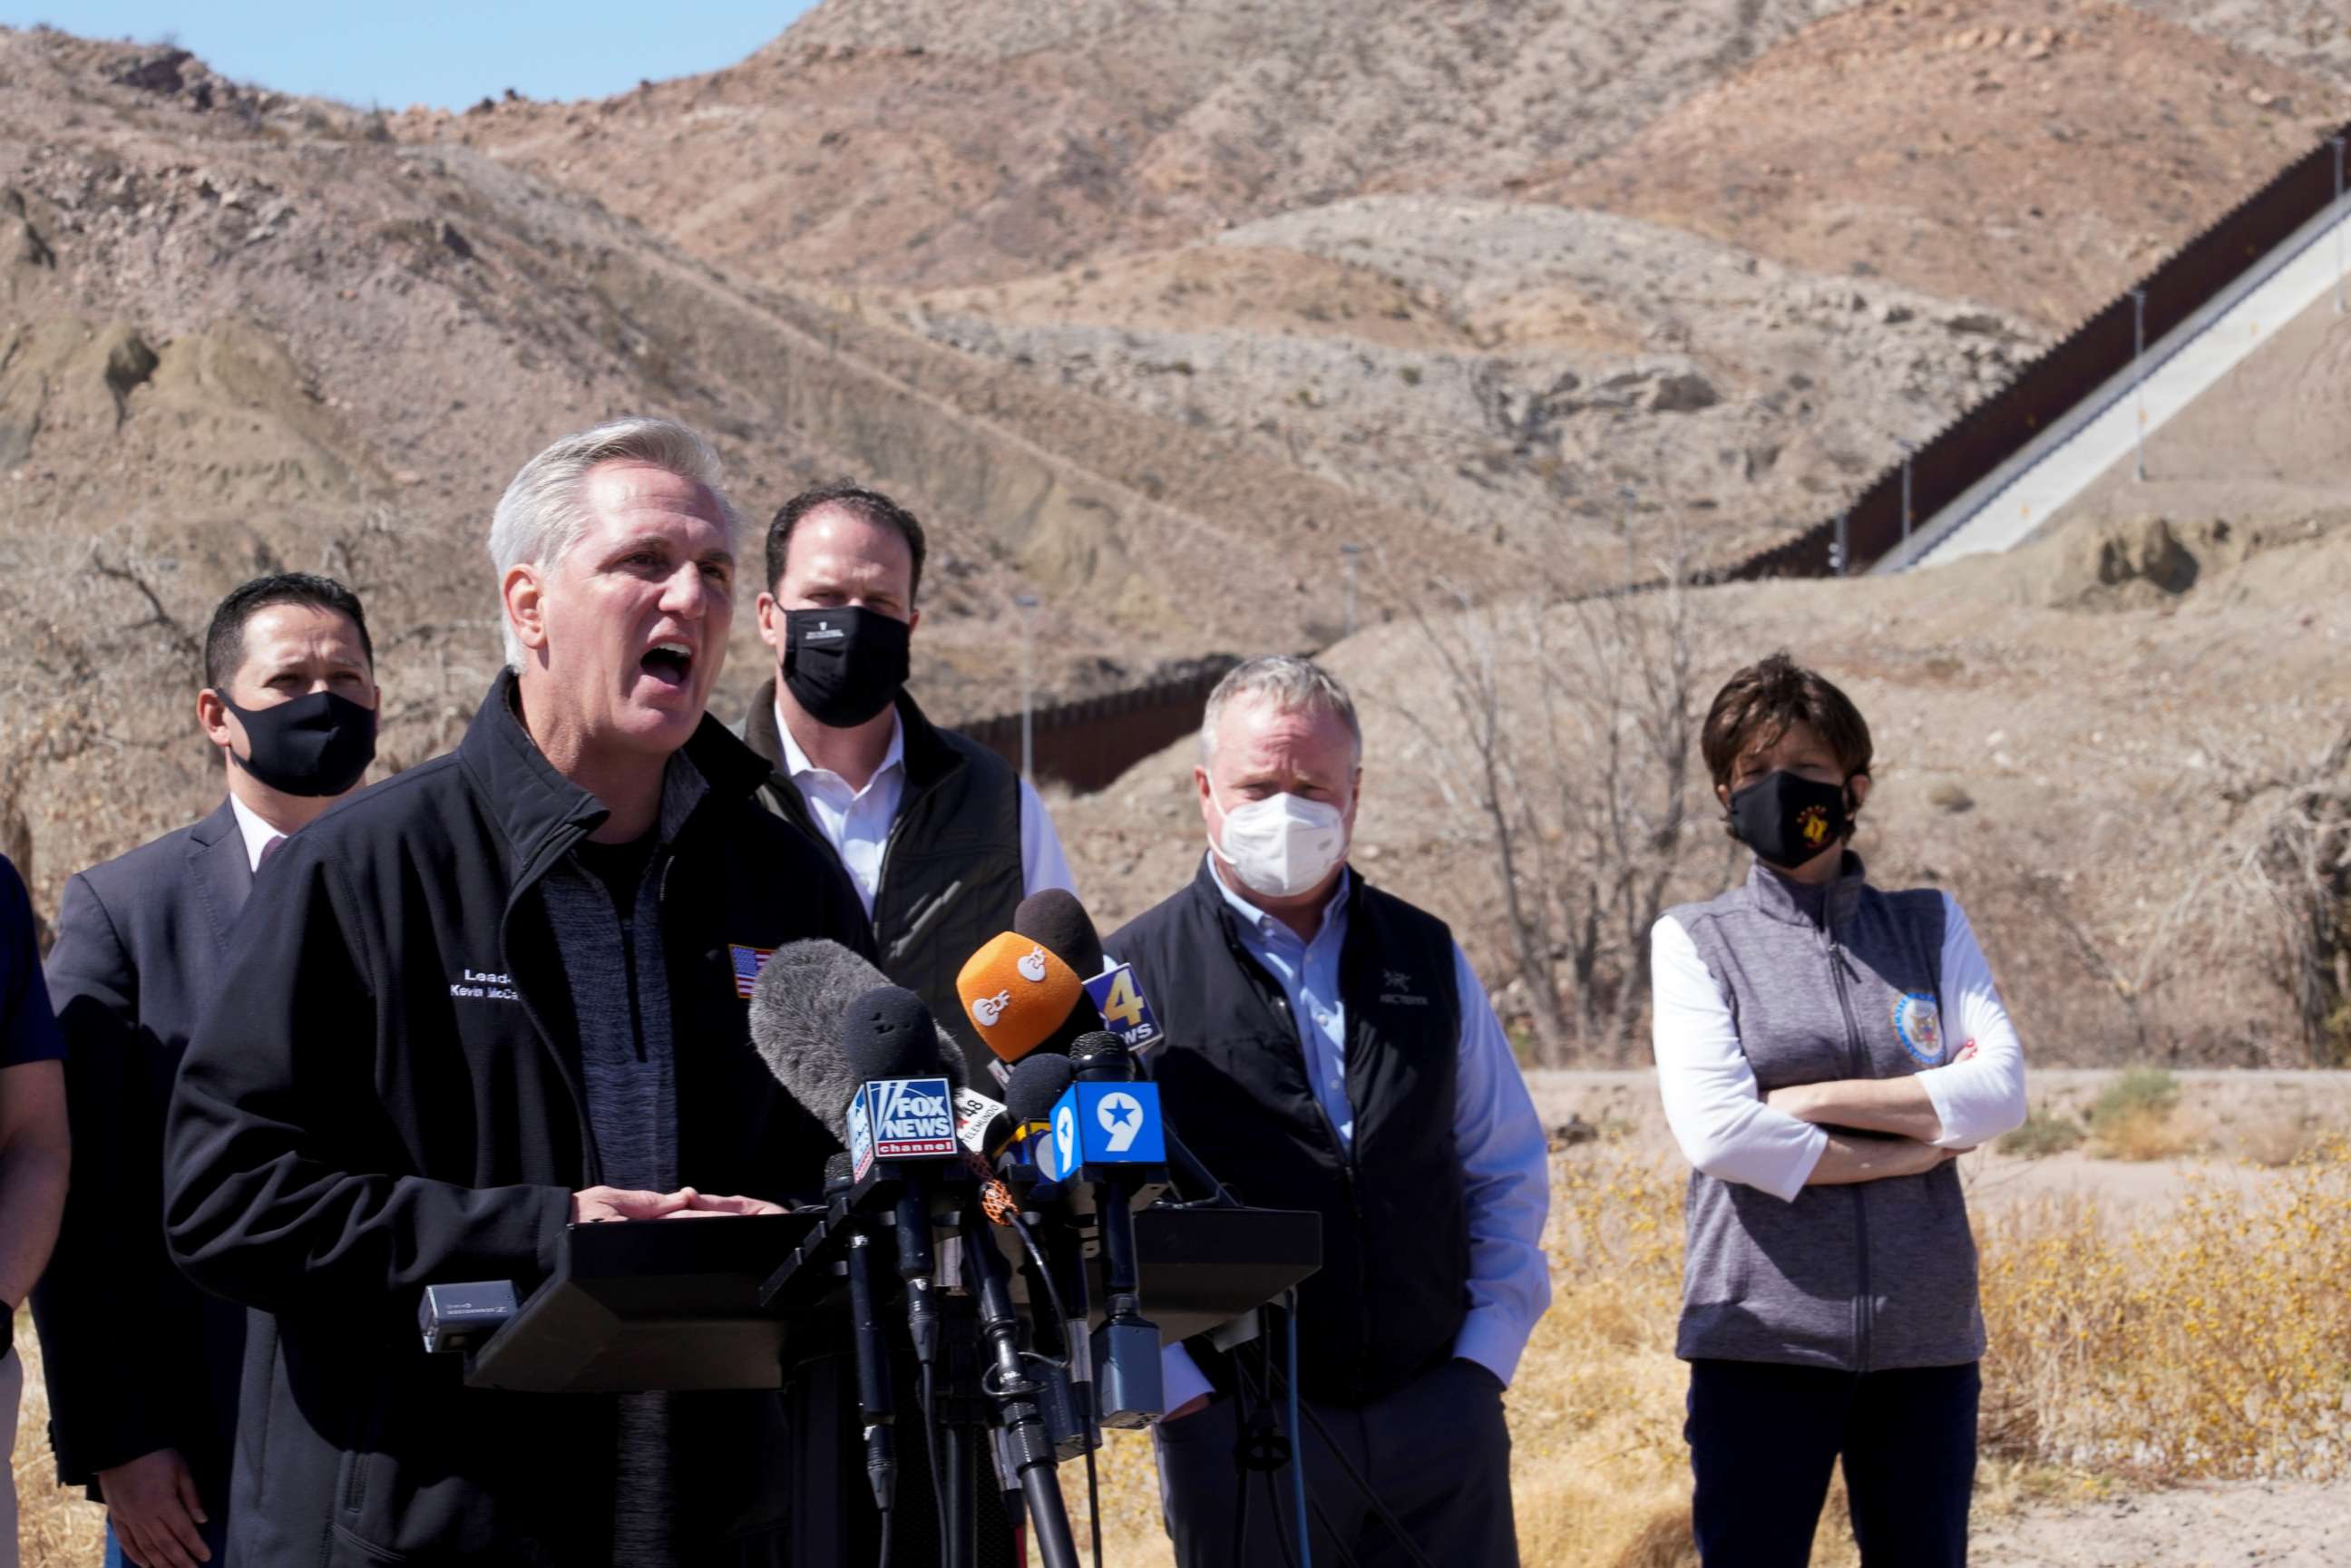 PHOTO: House Minority Leader Kevin McCarthy speaks to the press during a tour for a delegation of Republican lawmakers of the US-Mexico border in El Paso, Texas, March 15, 2021.